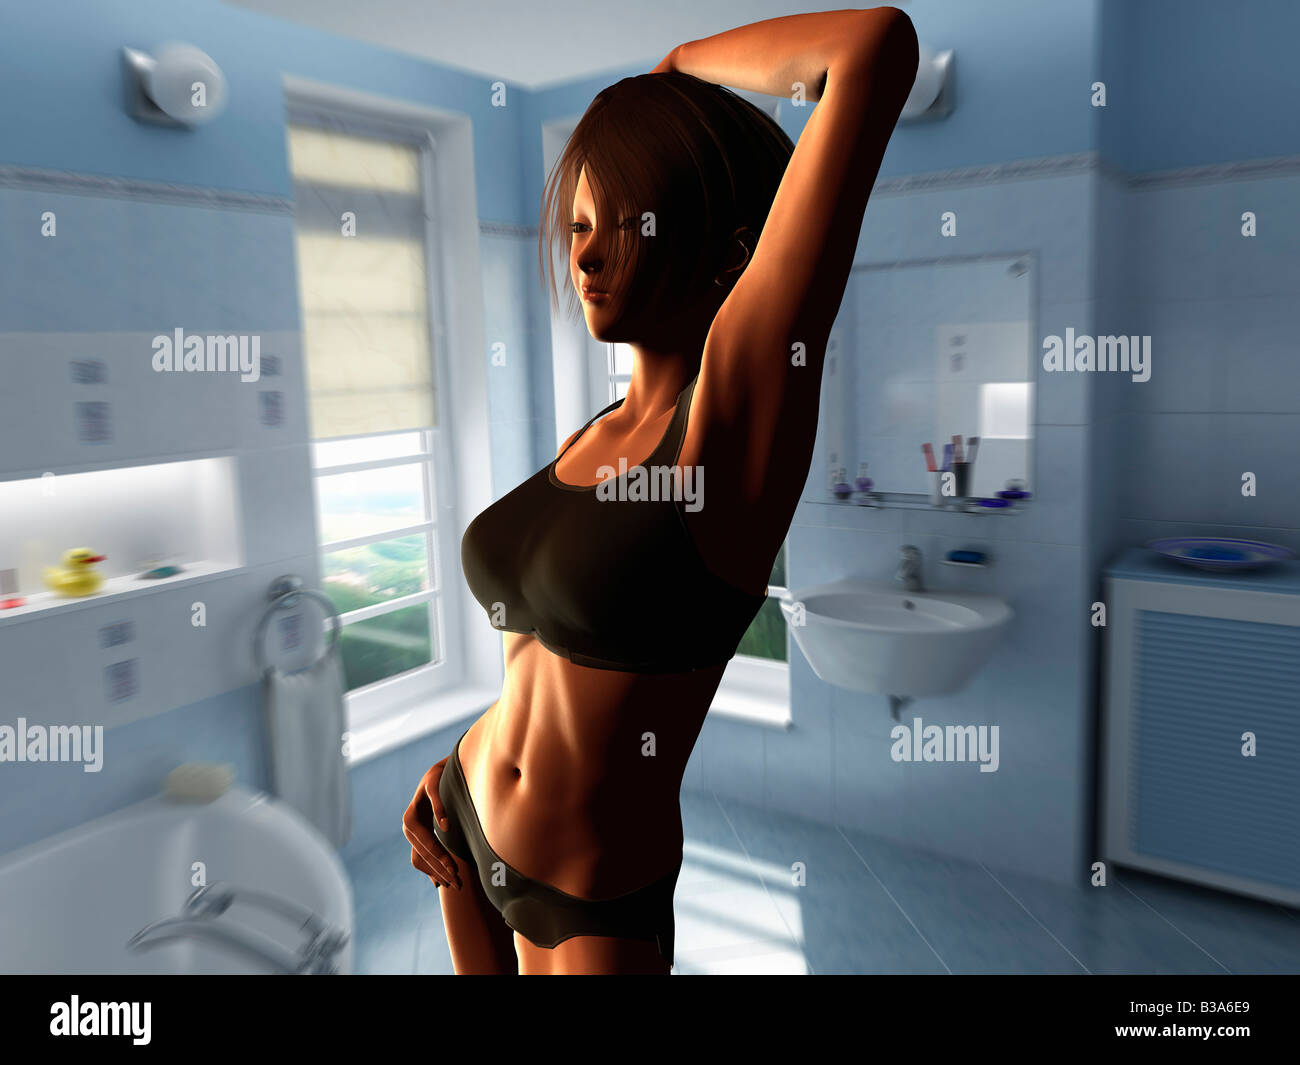 Computer Illustration Of A Young Woman In Bathroom Stock Photo